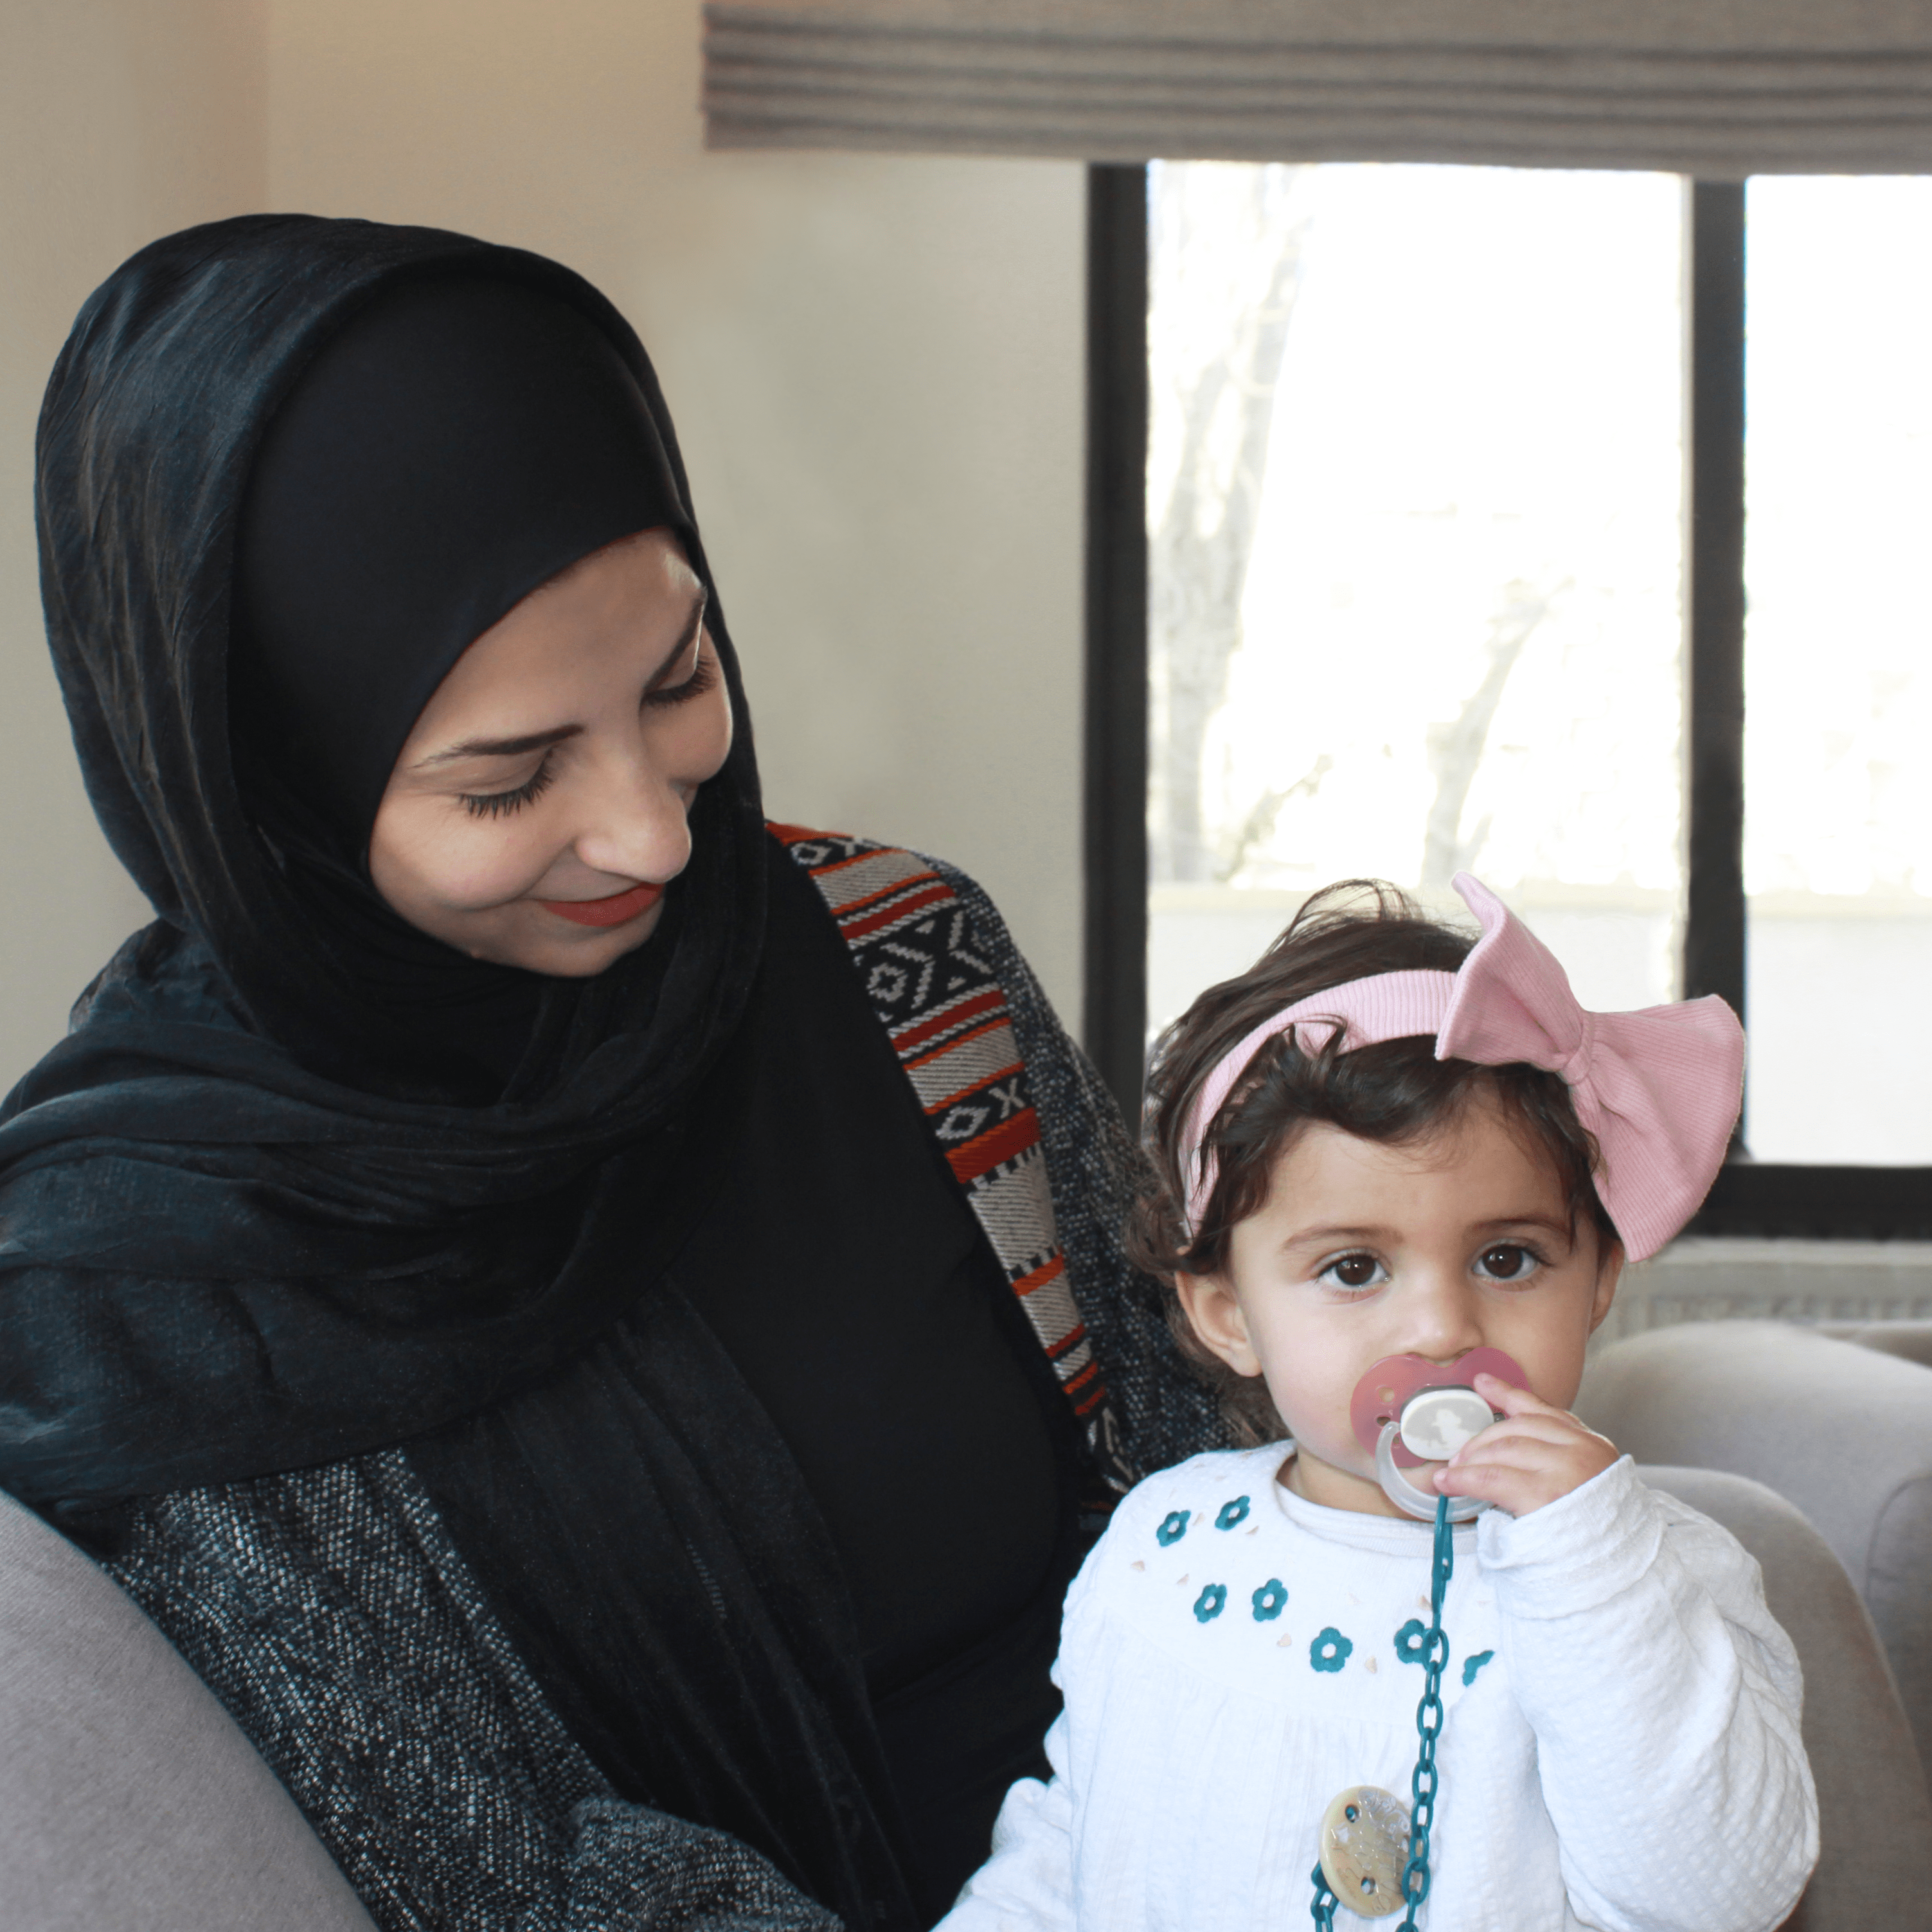 This Bodysuit is a Staple for all Hijabis with Nursing Babies